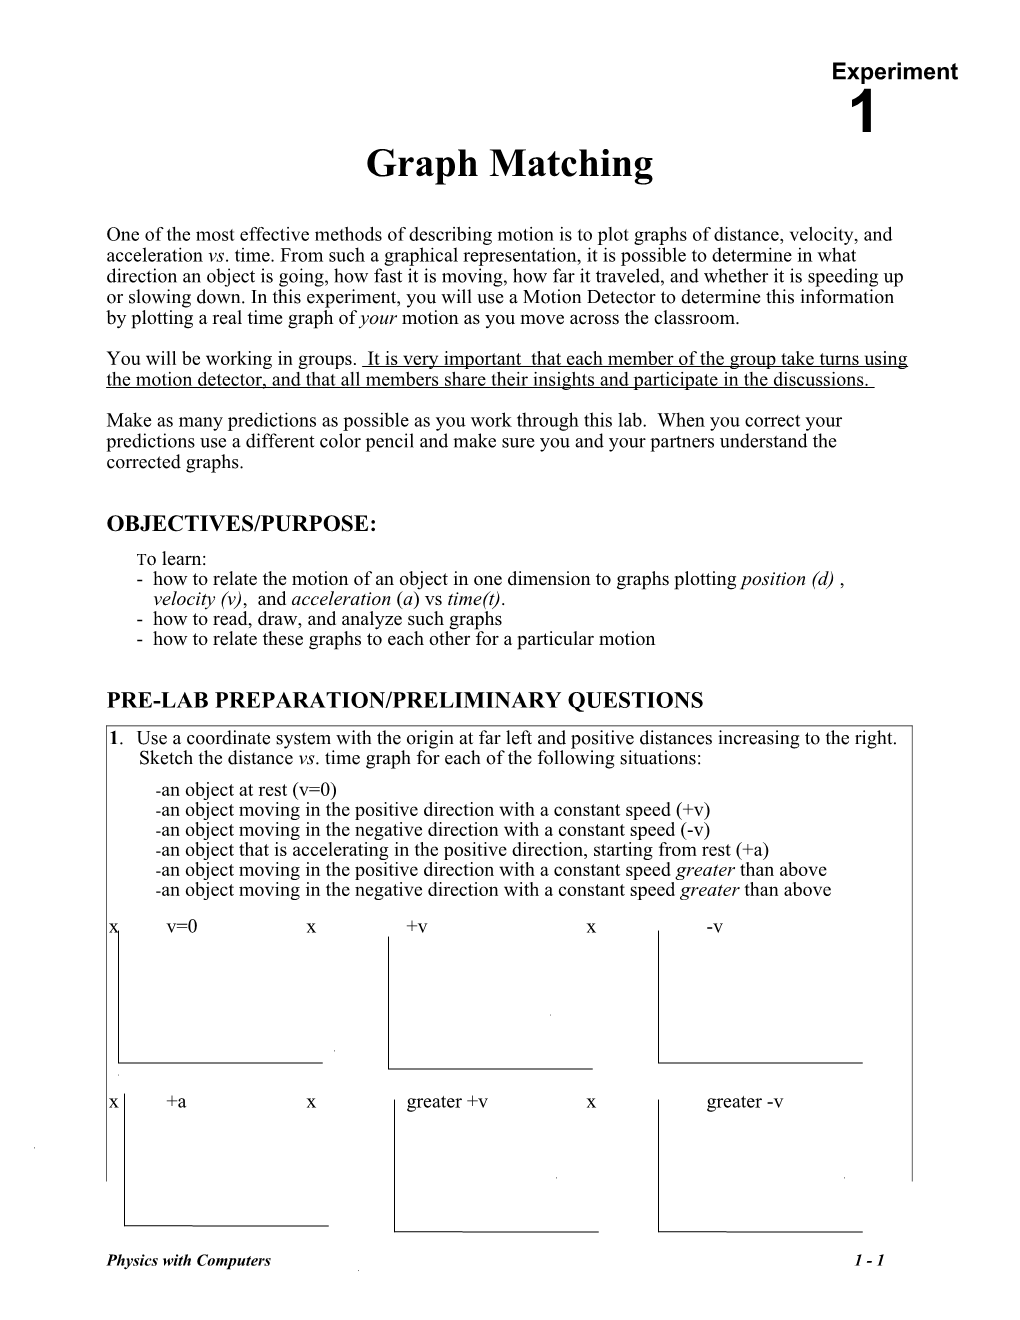 Phys 6 Graph Matching and Motion